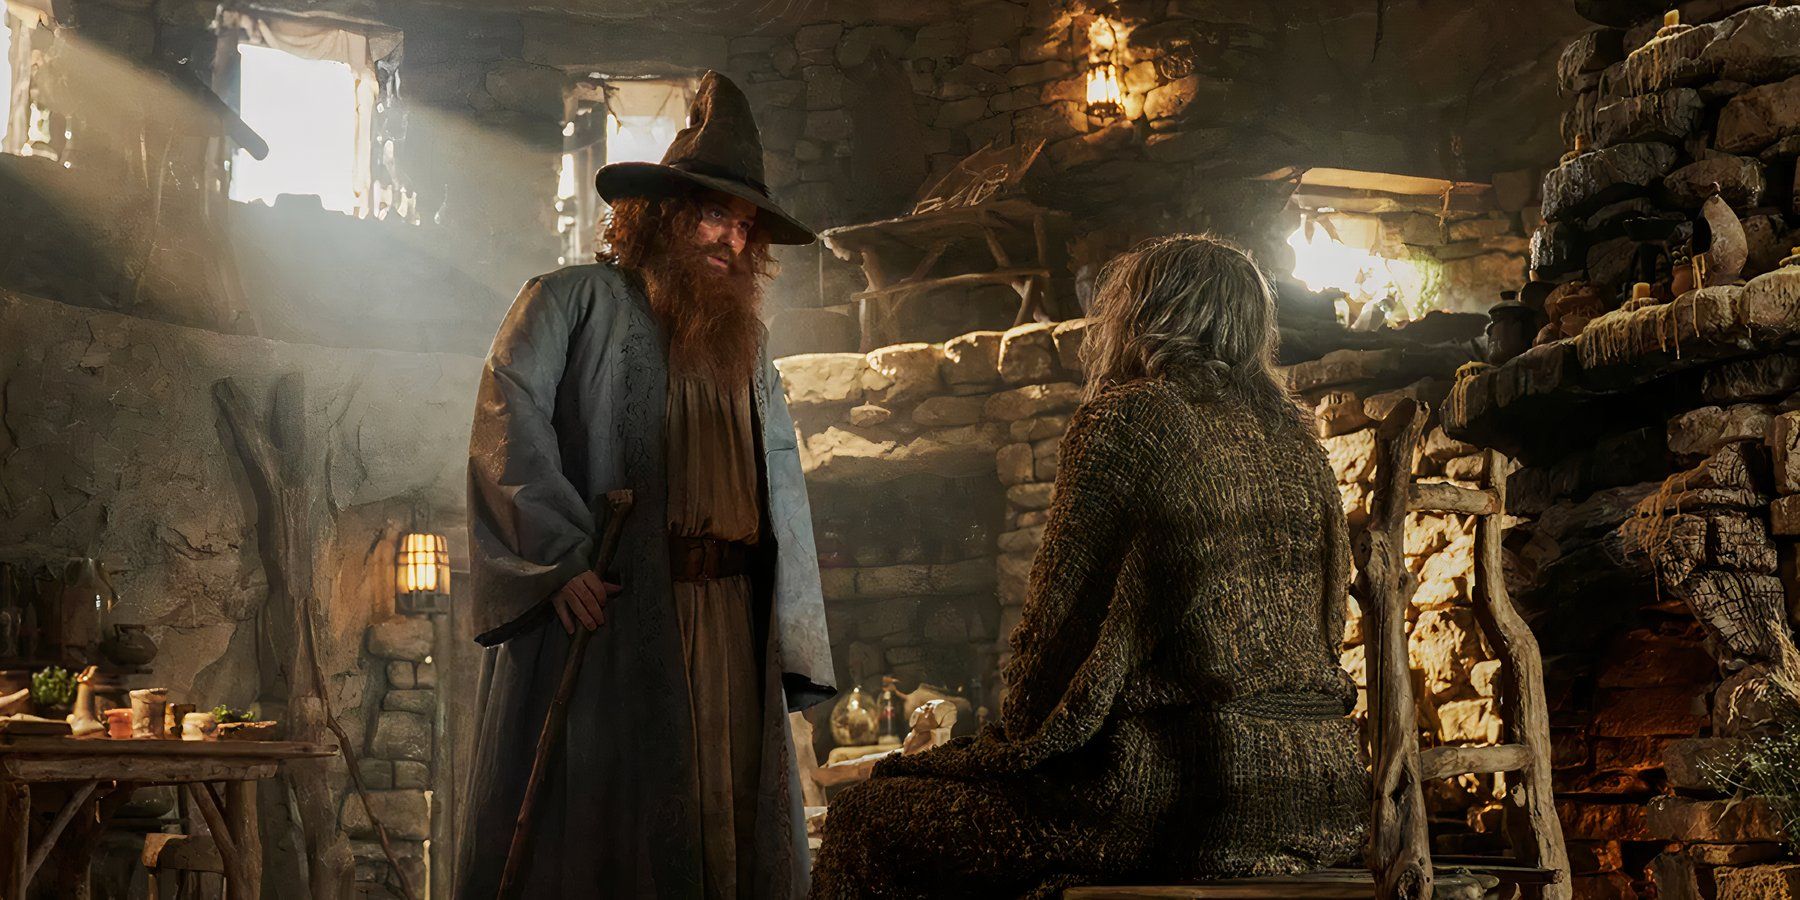 Tom Bombadil (Rory Kinnear) looks down on the Stranger (Daniel Weyman) in The Lord of the Rings, Season 2 of the Rings of Power